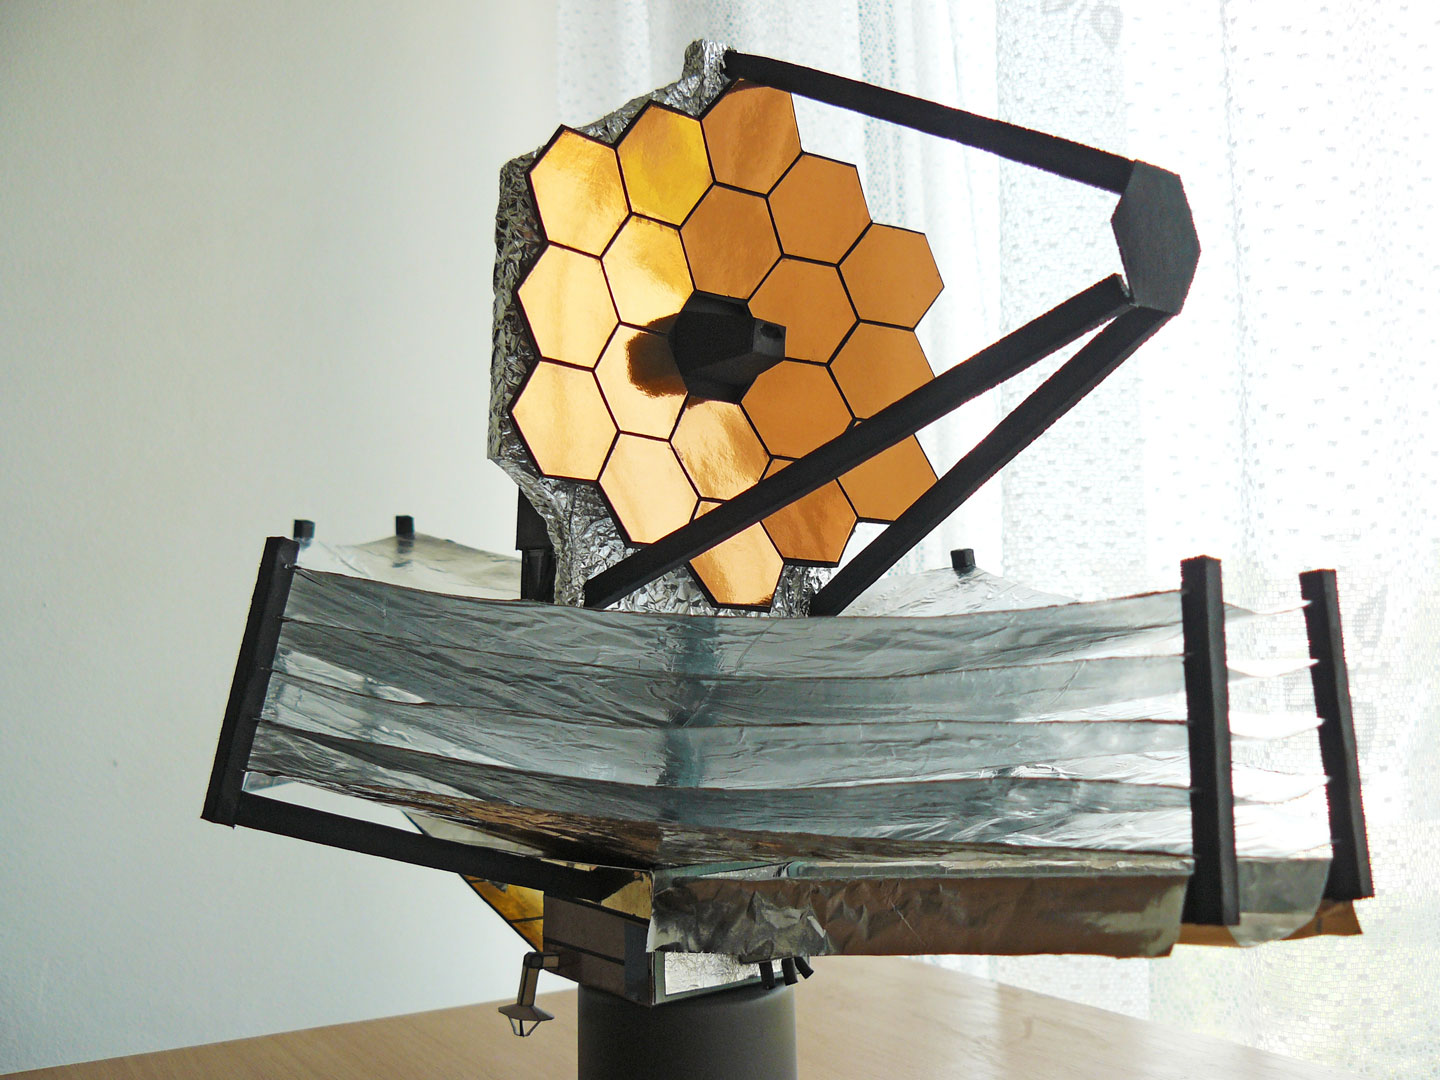 A "Tom Dani modification" of the paper model of the James Webb Space Telescope that also uses layers of aluminum foil and high-gloss self-adhesive foils in addition to the card stock paper used in much of the model.